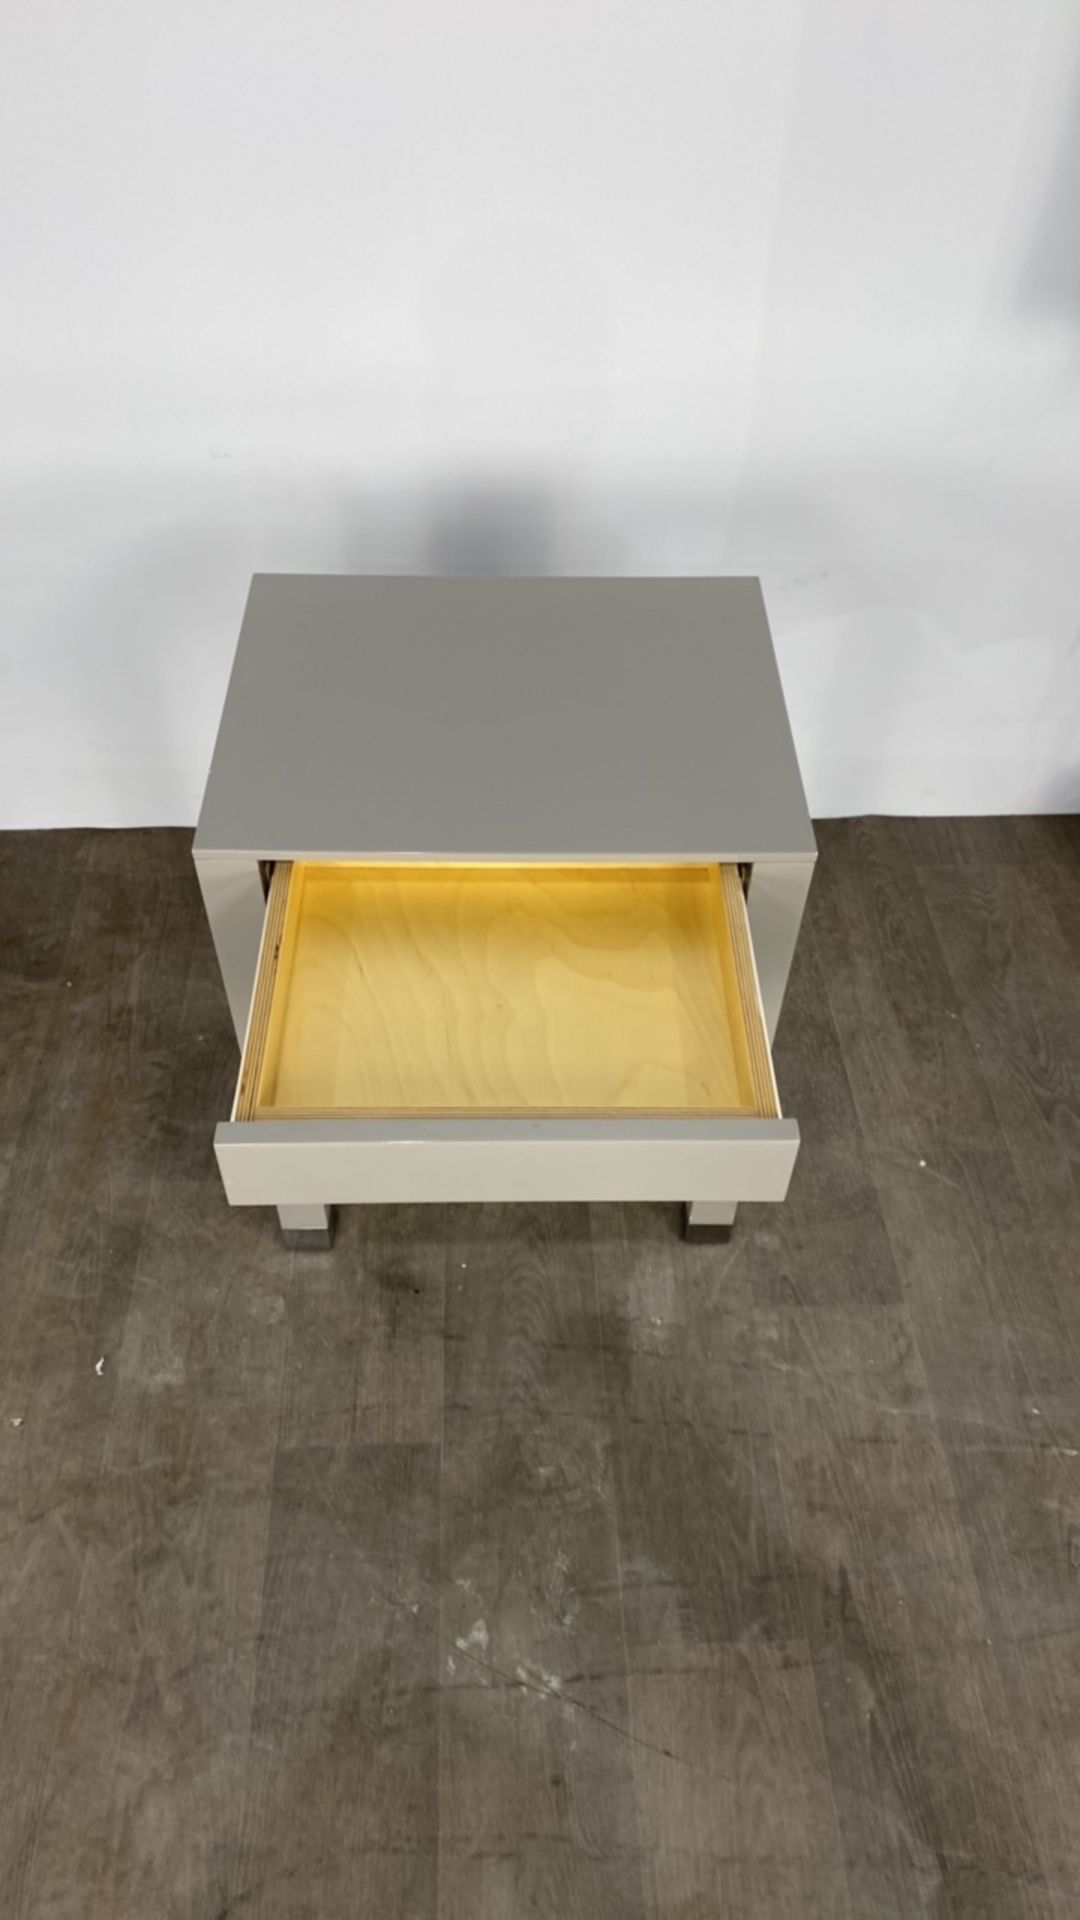 Side Table with Drawer - Grey Gloss Finished x4 - Image 2 of 3